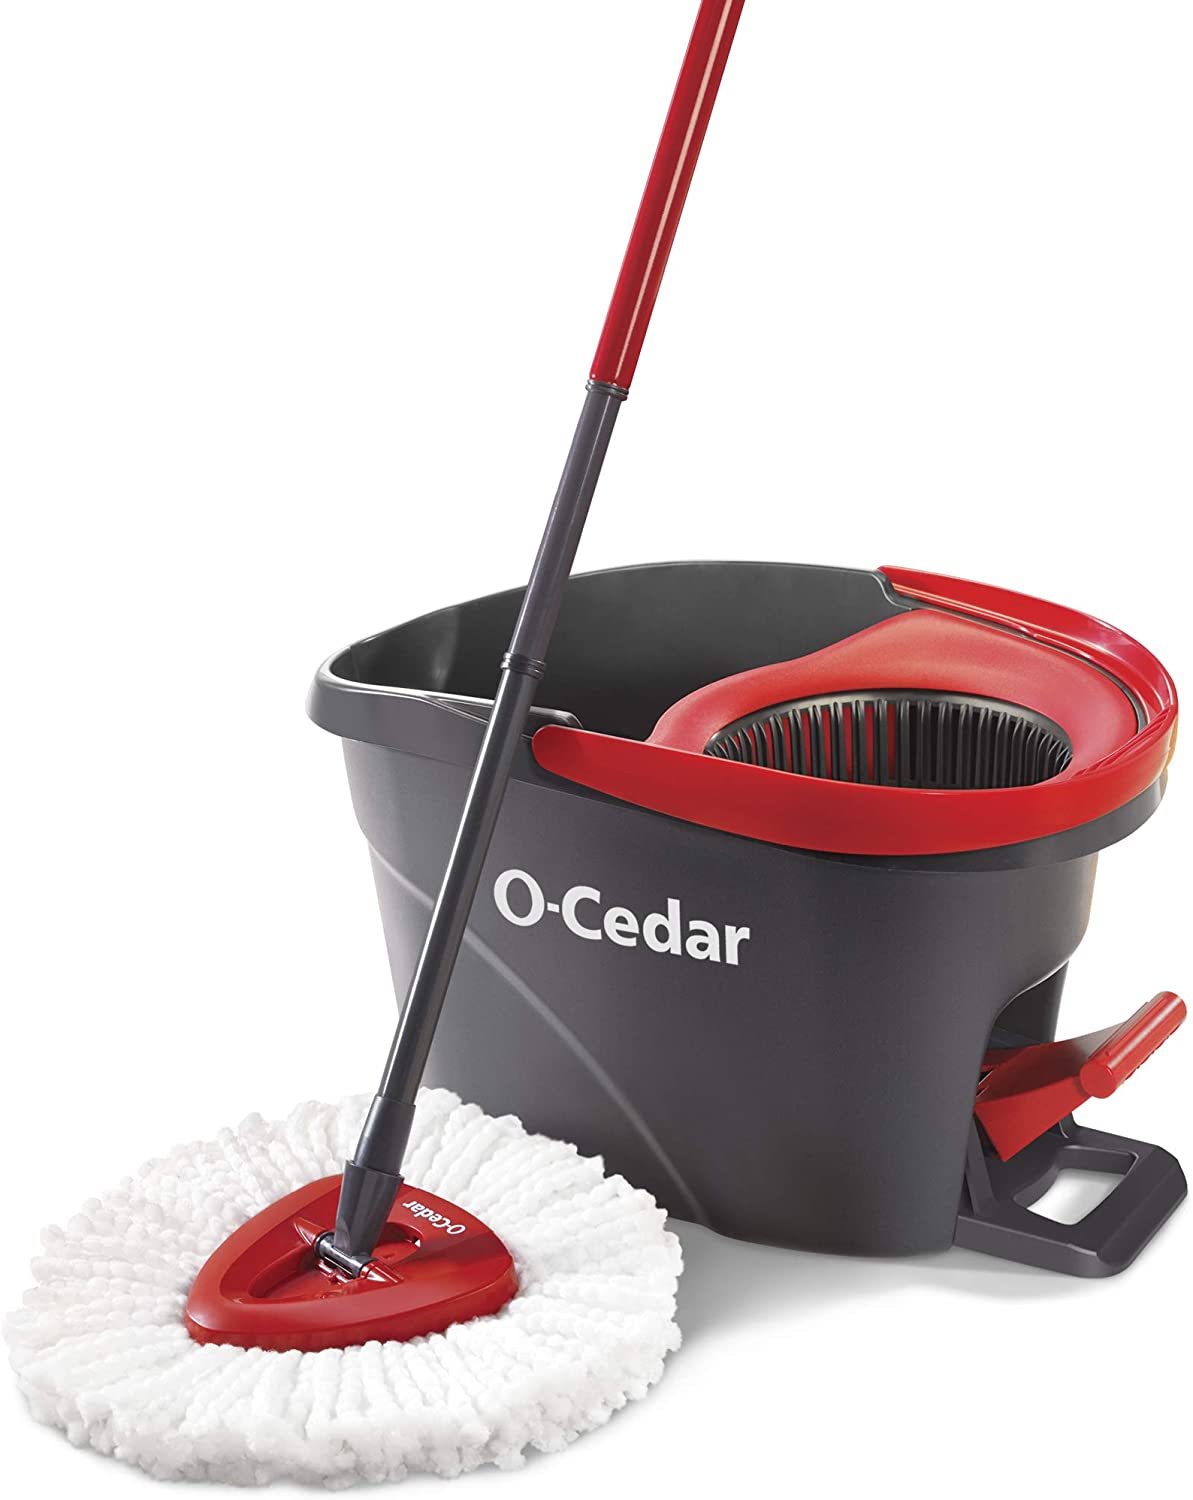 O-Cedar EasyWring Microfiber Spin Mop, Bucket Floor Cleaning System, Red, Gray 44